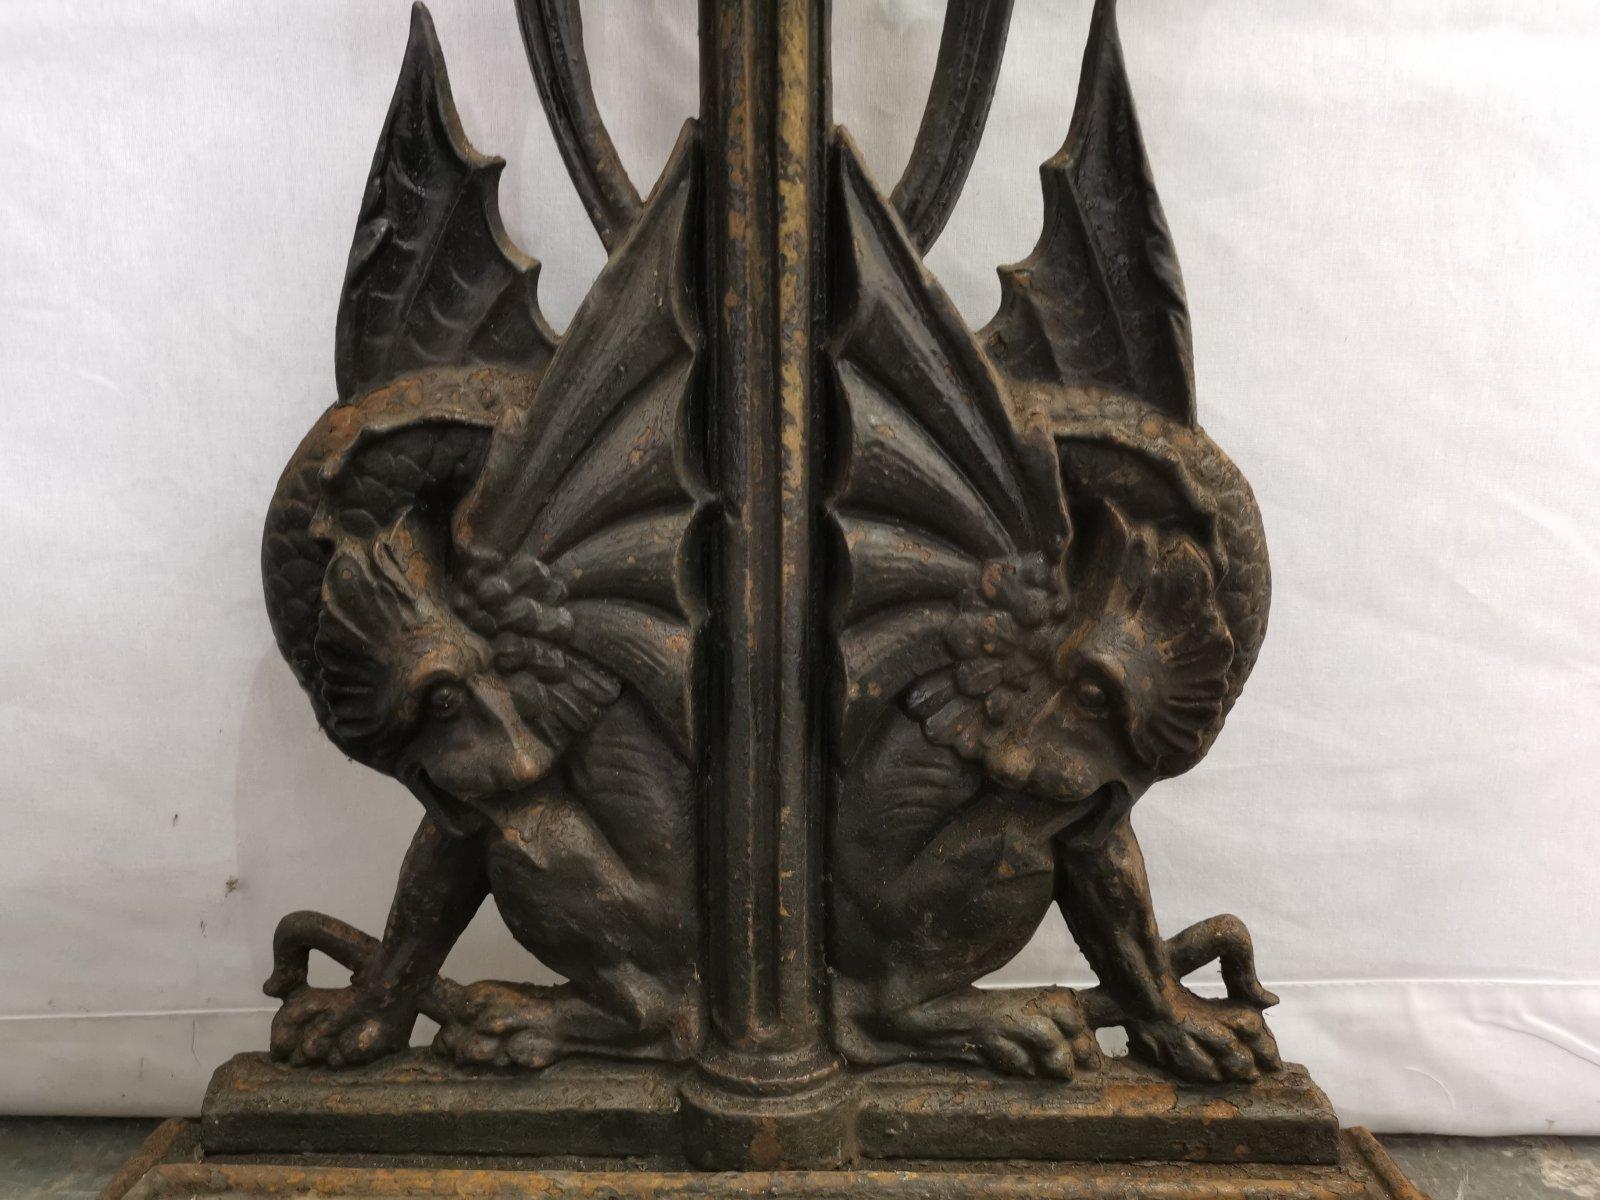 Falkirk, an Aesthetic Movement Cast Iron Stick Stand with Mythical Dragons For Sale 1